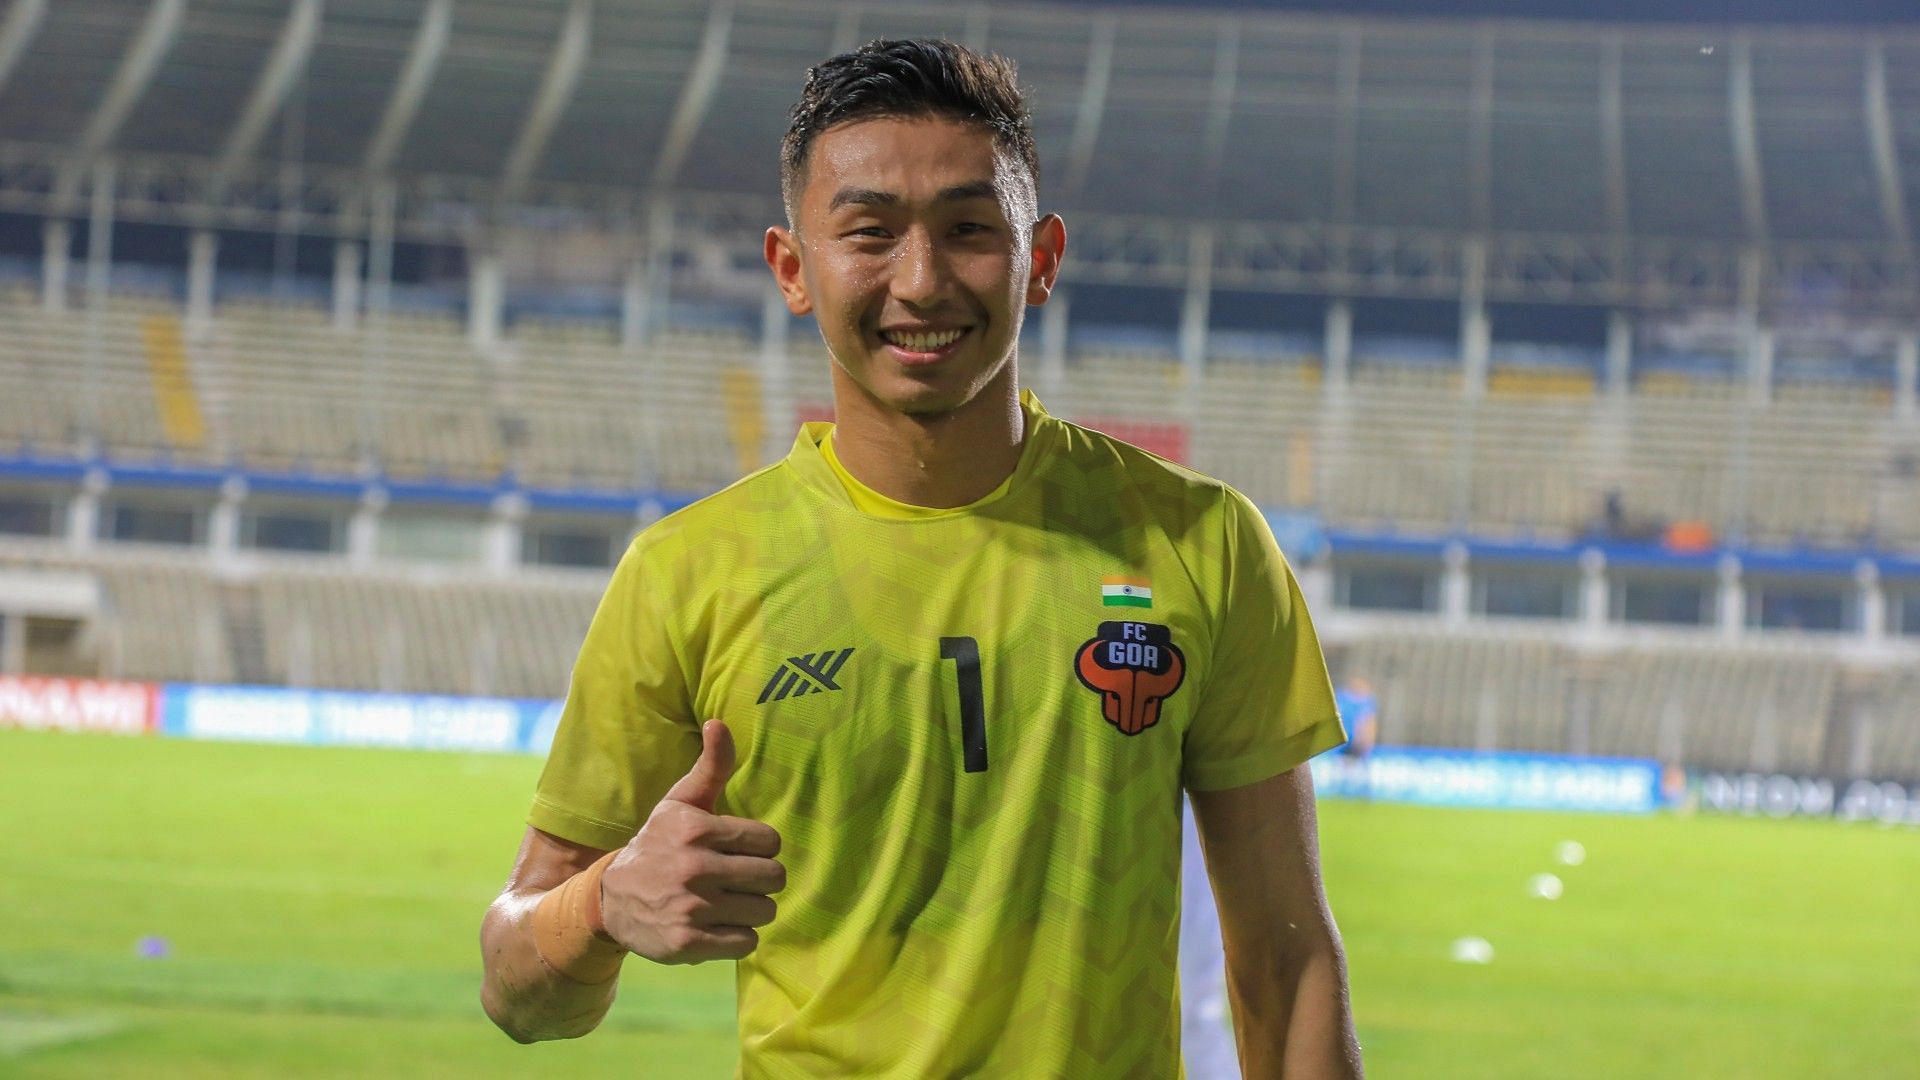 Dheeraj Singh made 26 saves, the most by any goalkeeper in the 2021 AFC Champions League. (Image - AIFF)